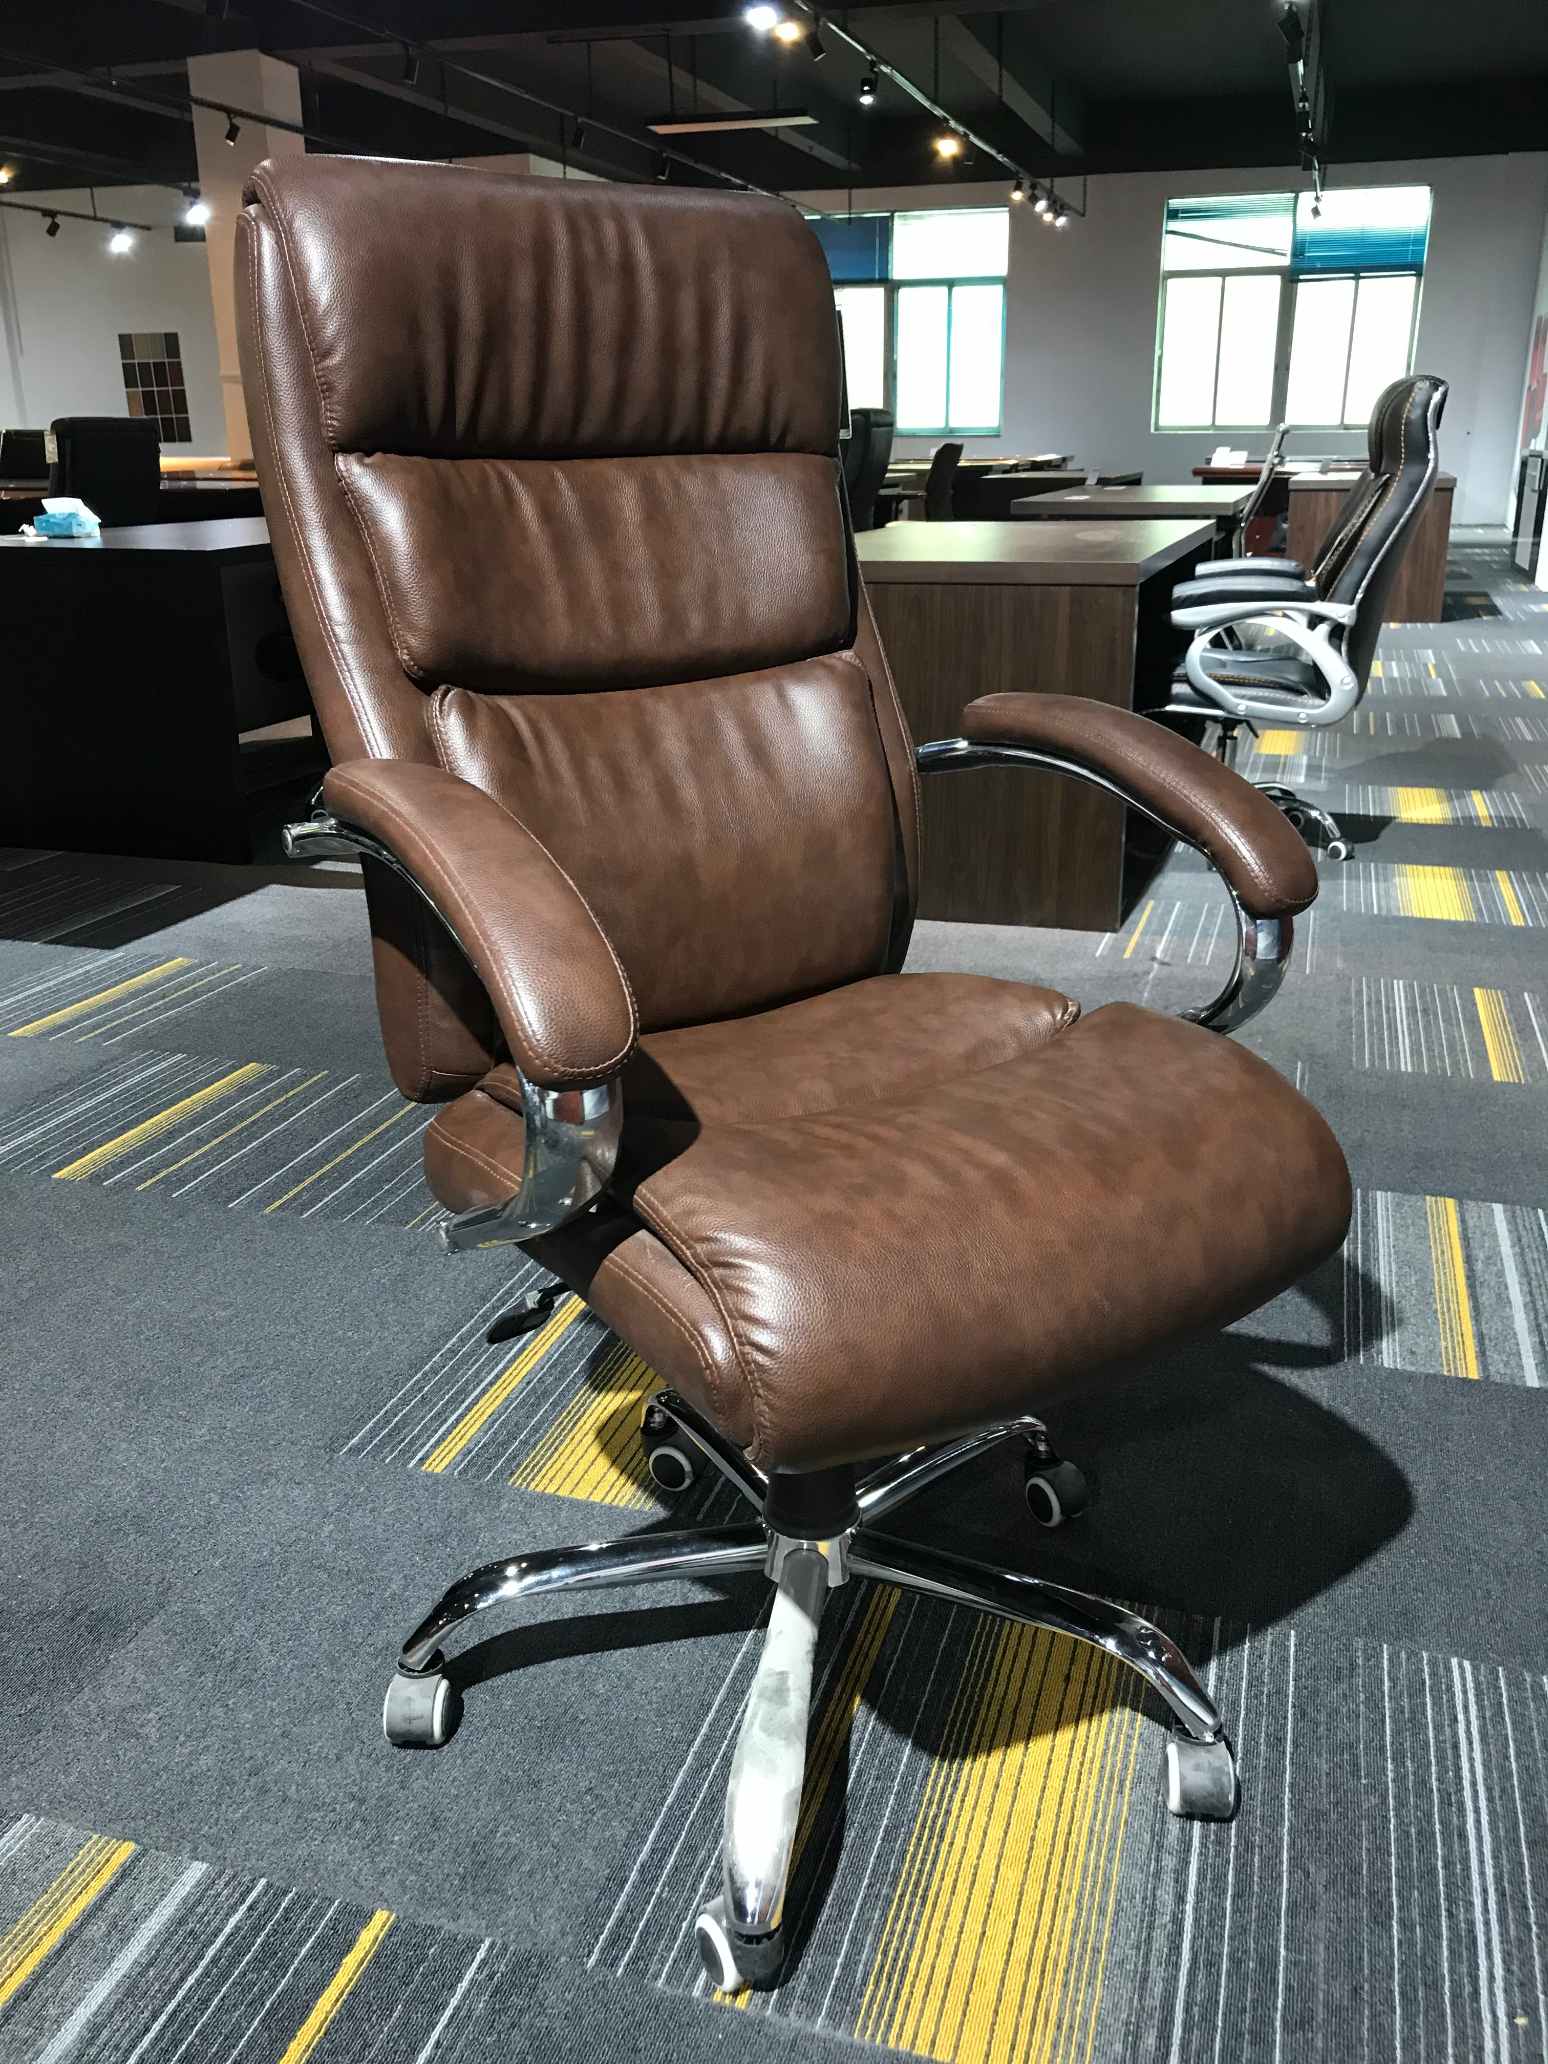 Sharing a popular office chair